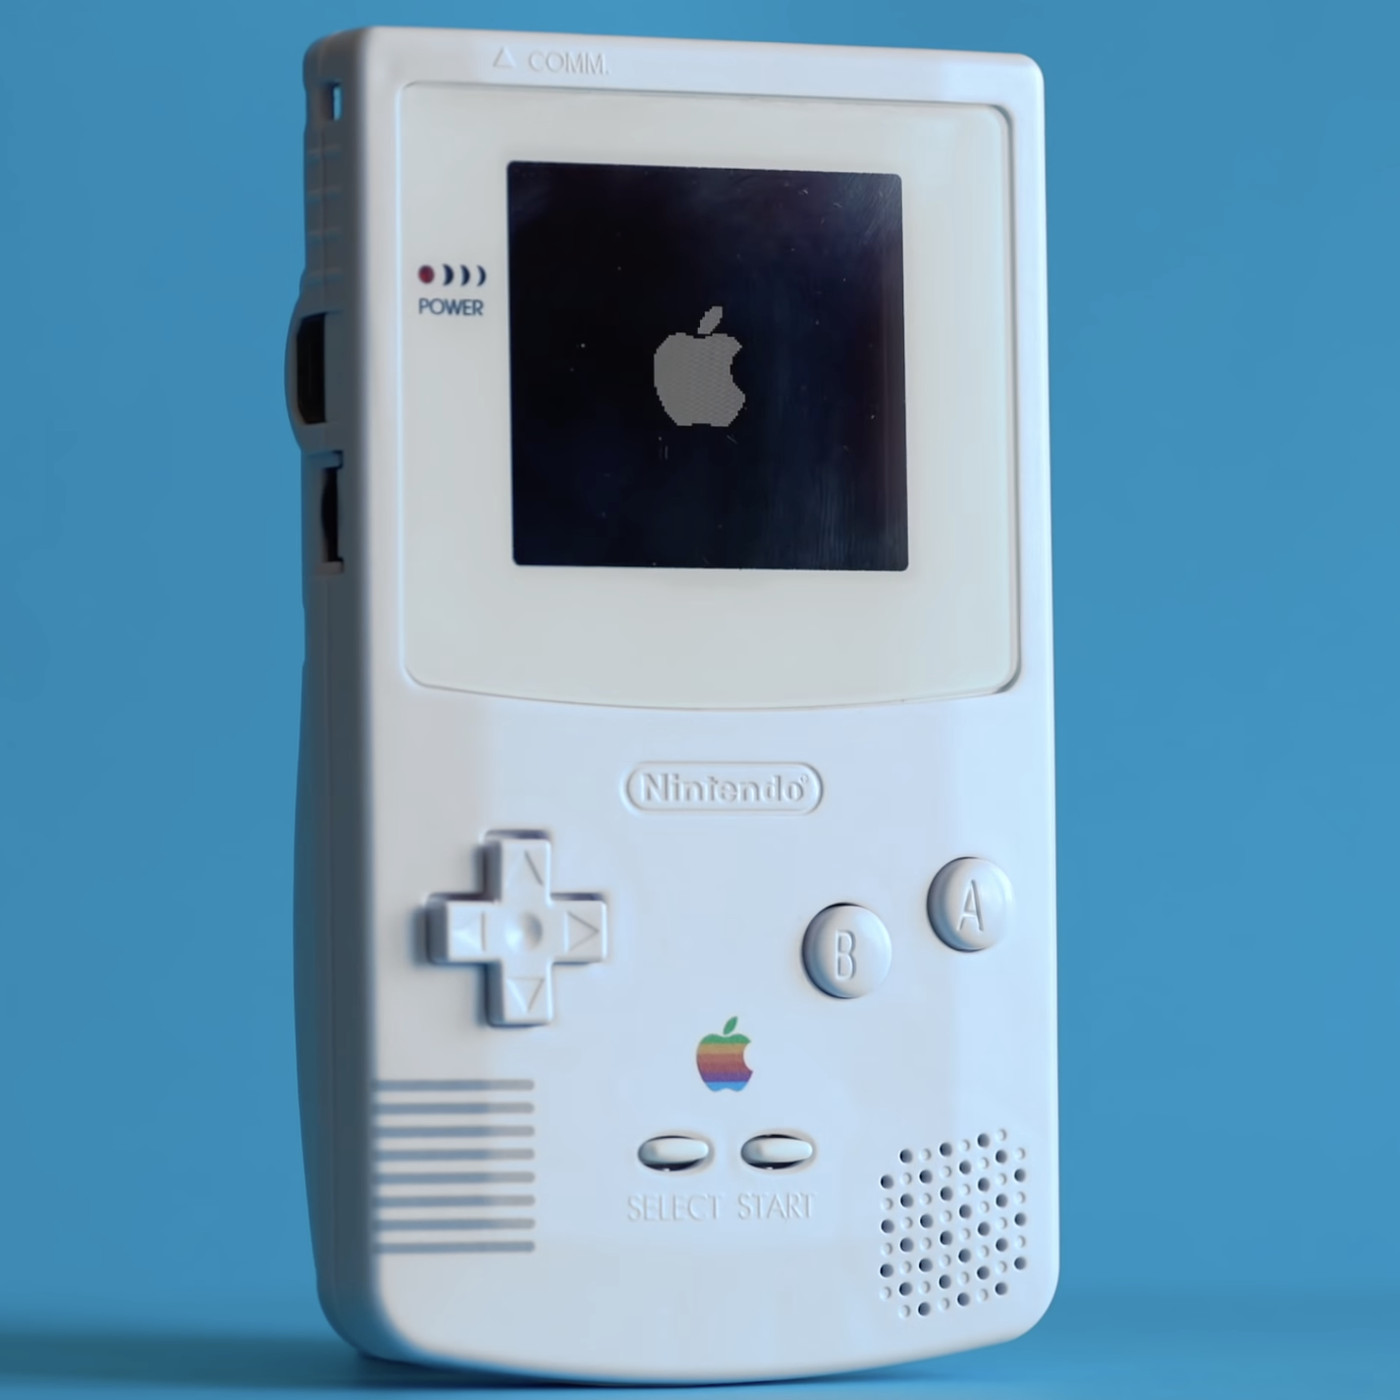 Someone modded a Game Boy Color to act as a much better Apple TV 